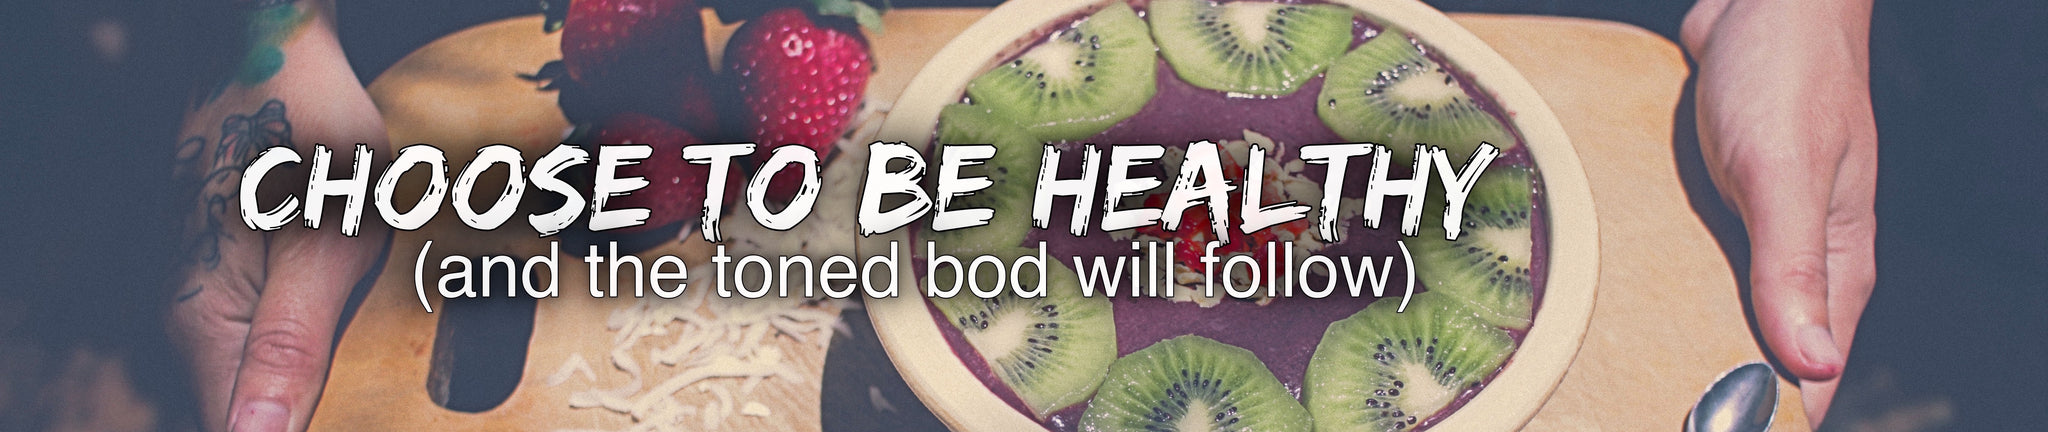 Choose To Be Healthy and The Toned Bod Will Follow